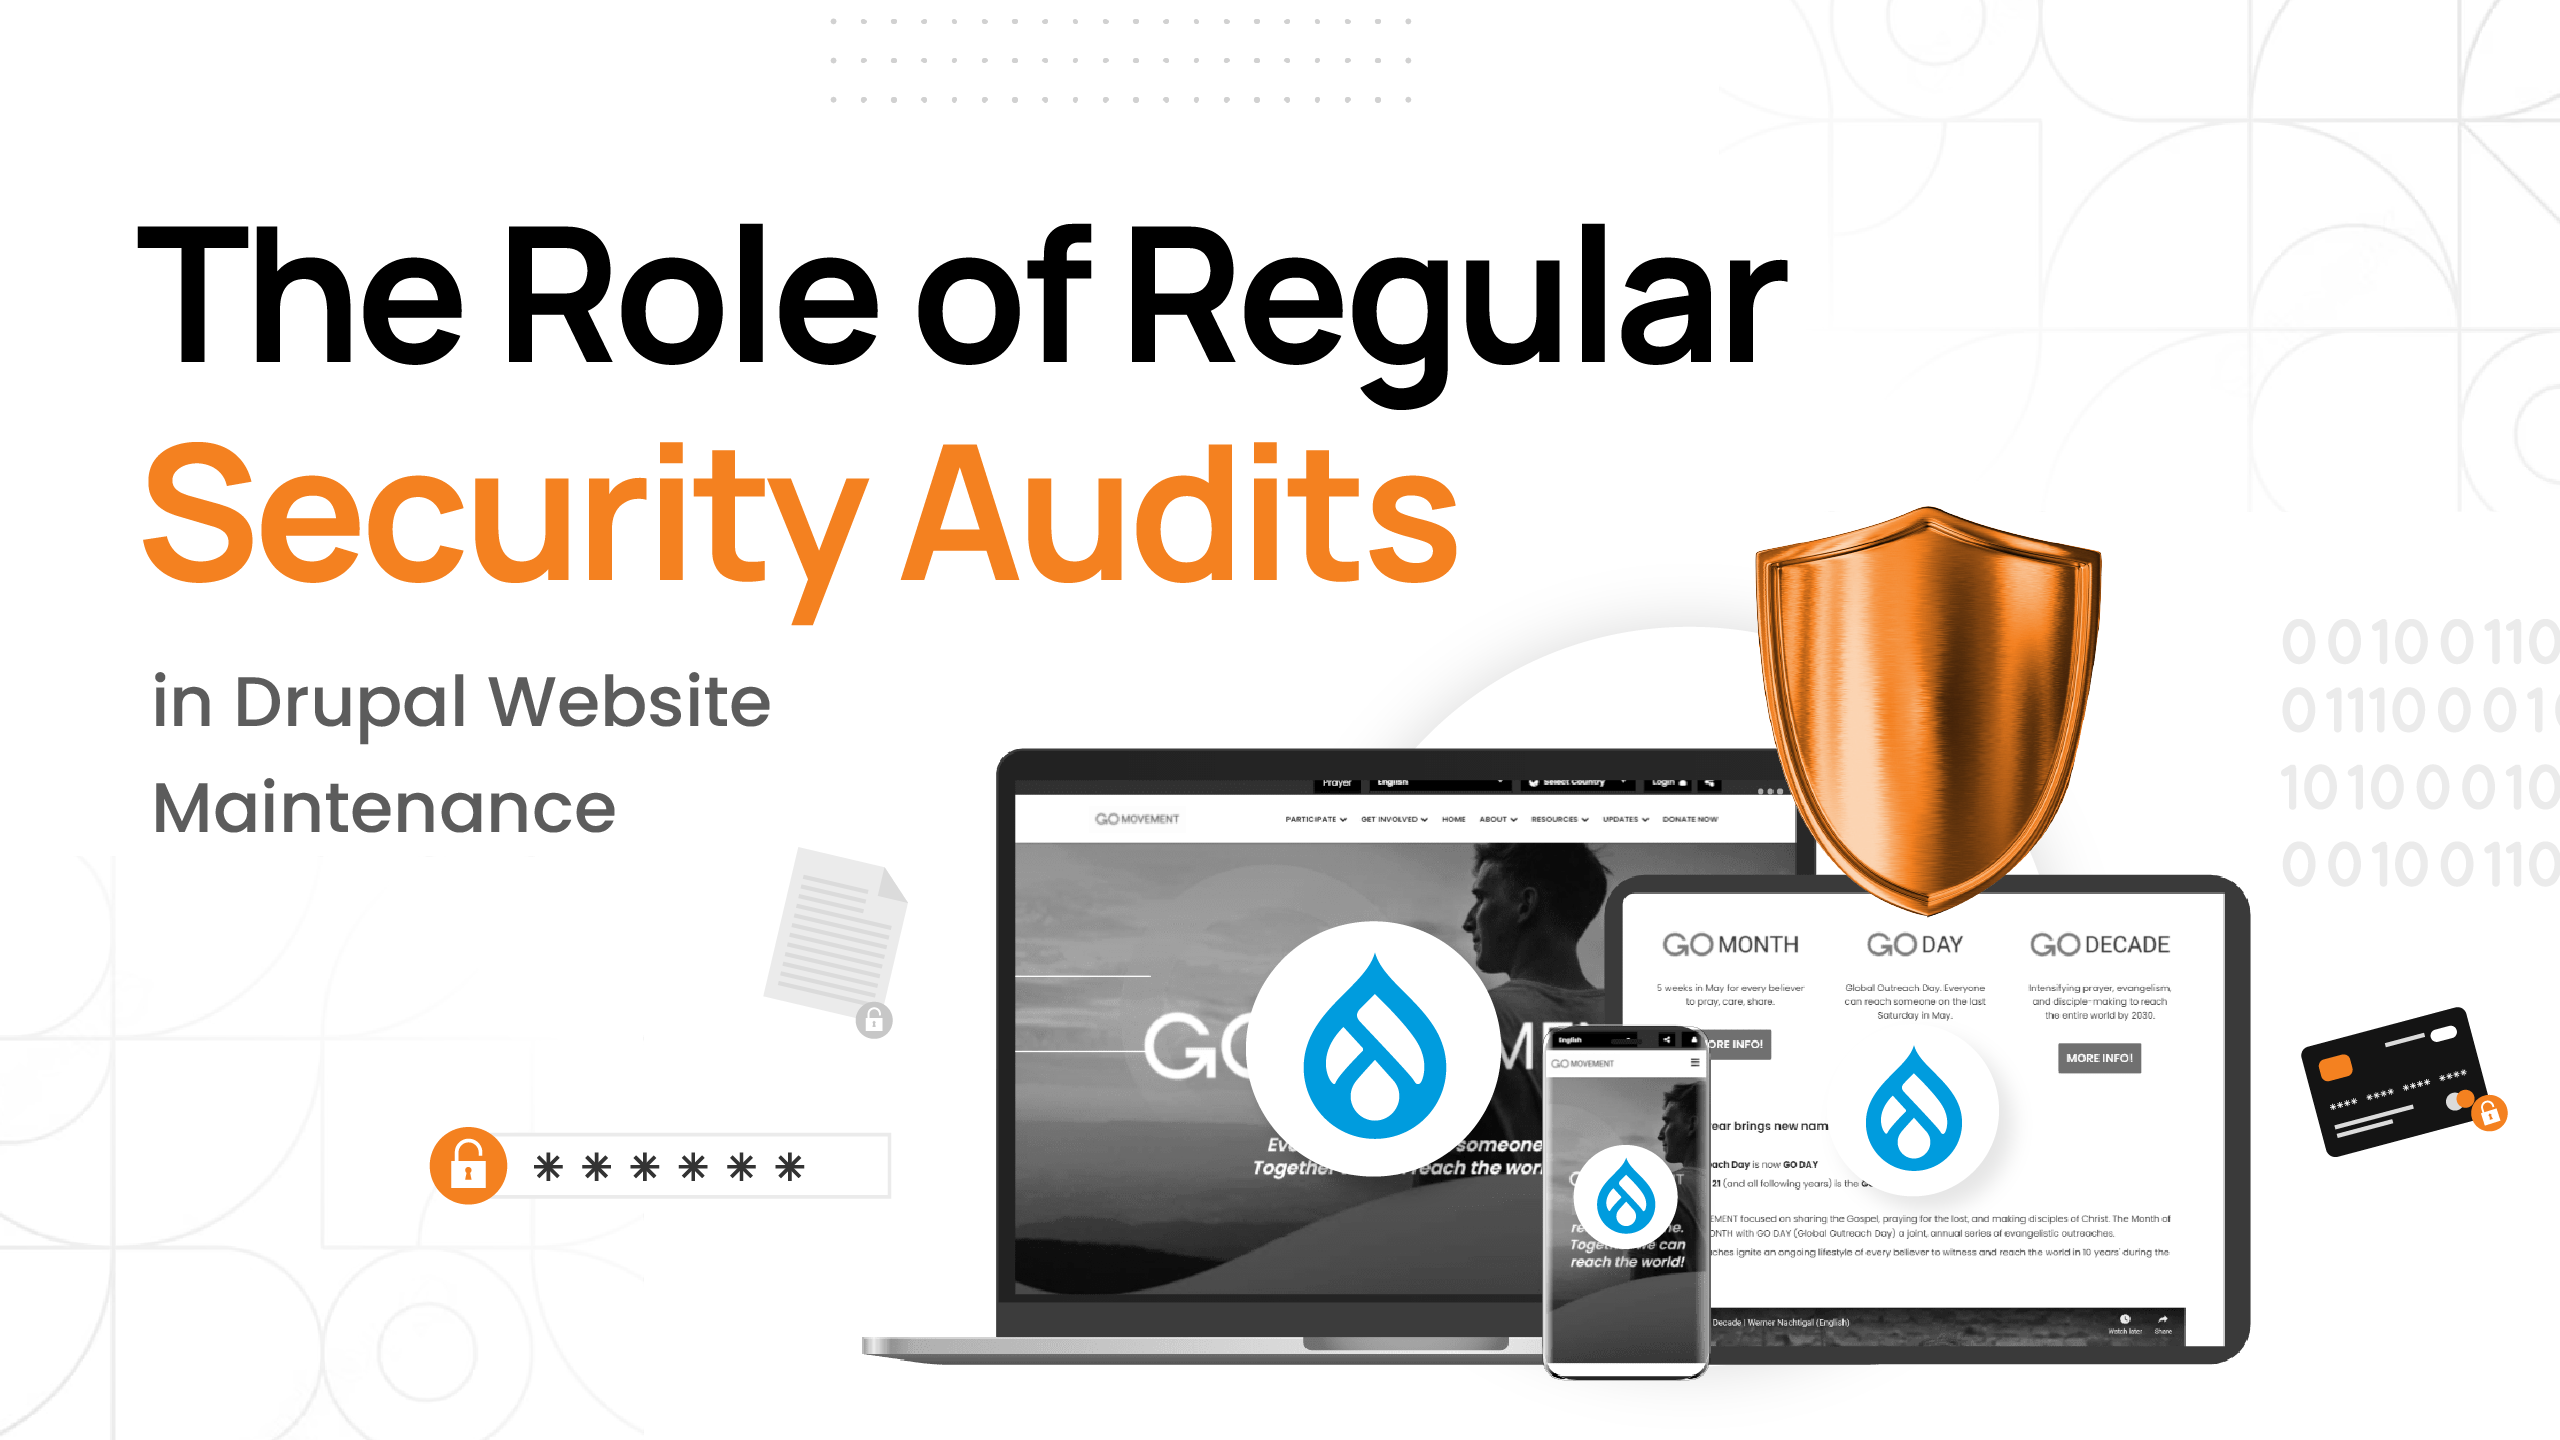 The Role of Regular Security Audits in Drupal Website Maintenance